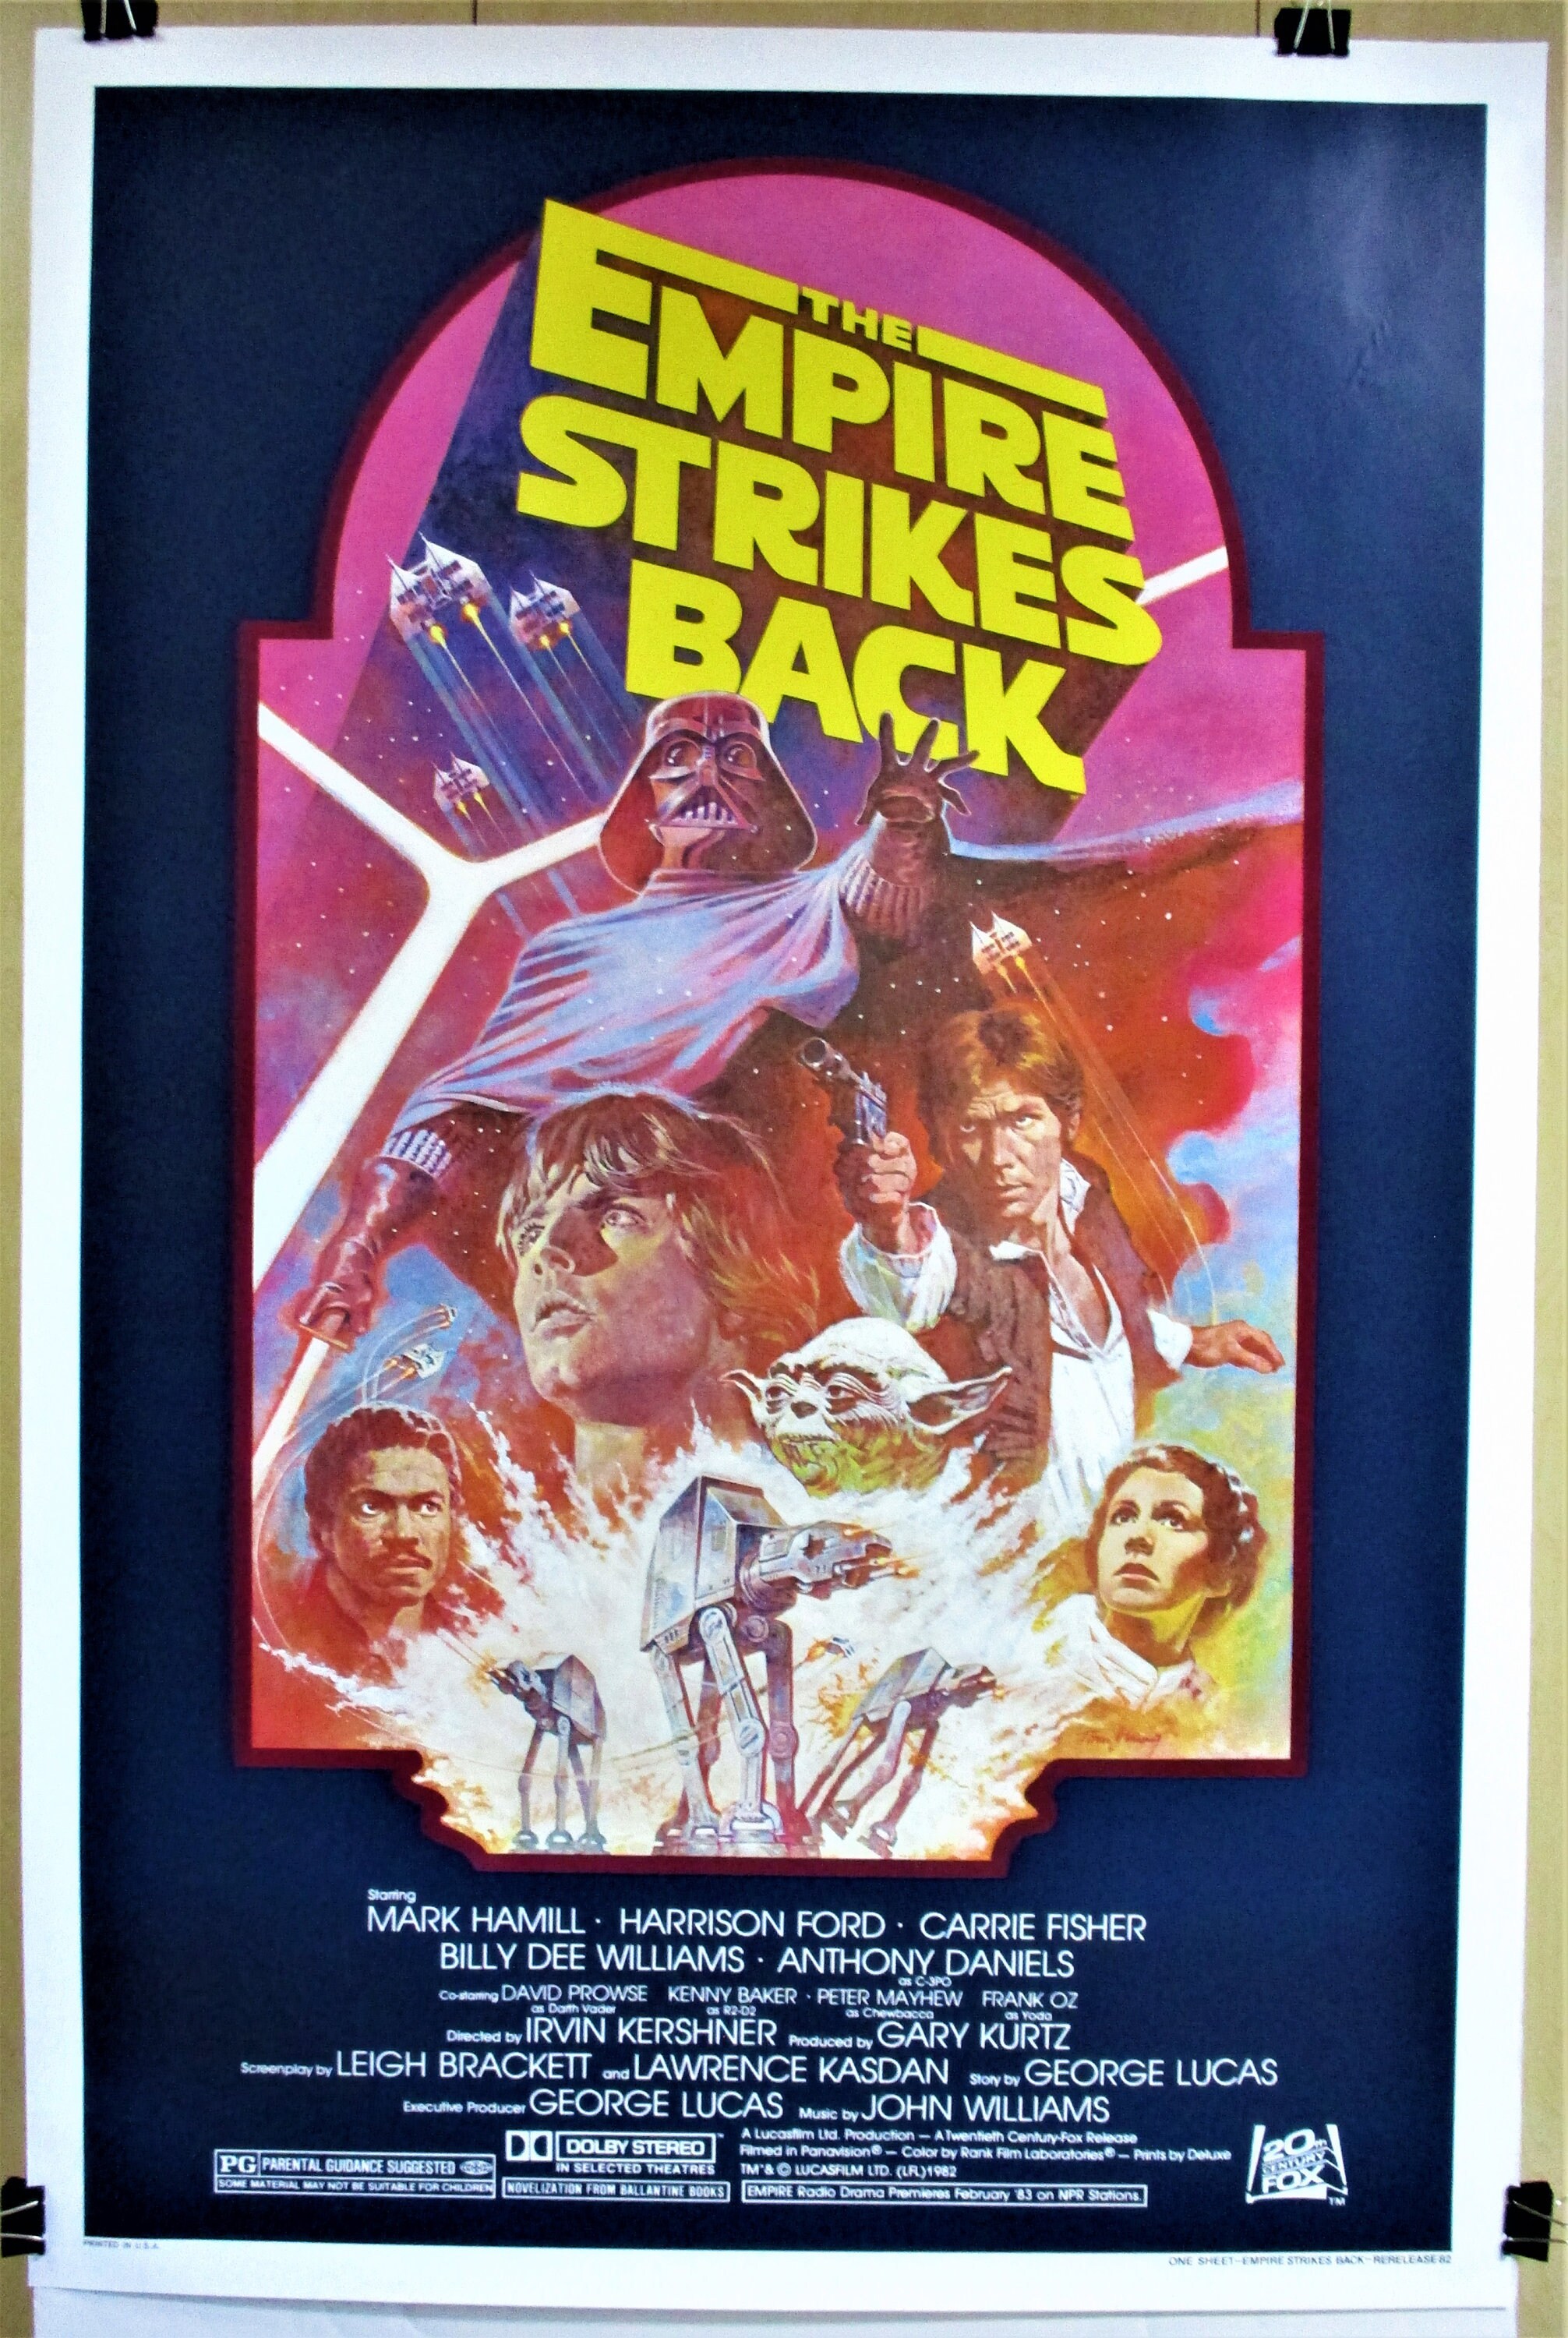 The EMPIRE STRIKES BACK, Episode V Star Wars, Original 1982 Rr 27X41 Movie Poster, Trilogy, Mark Hammill, Harrison Ford, Carrie Fisher,